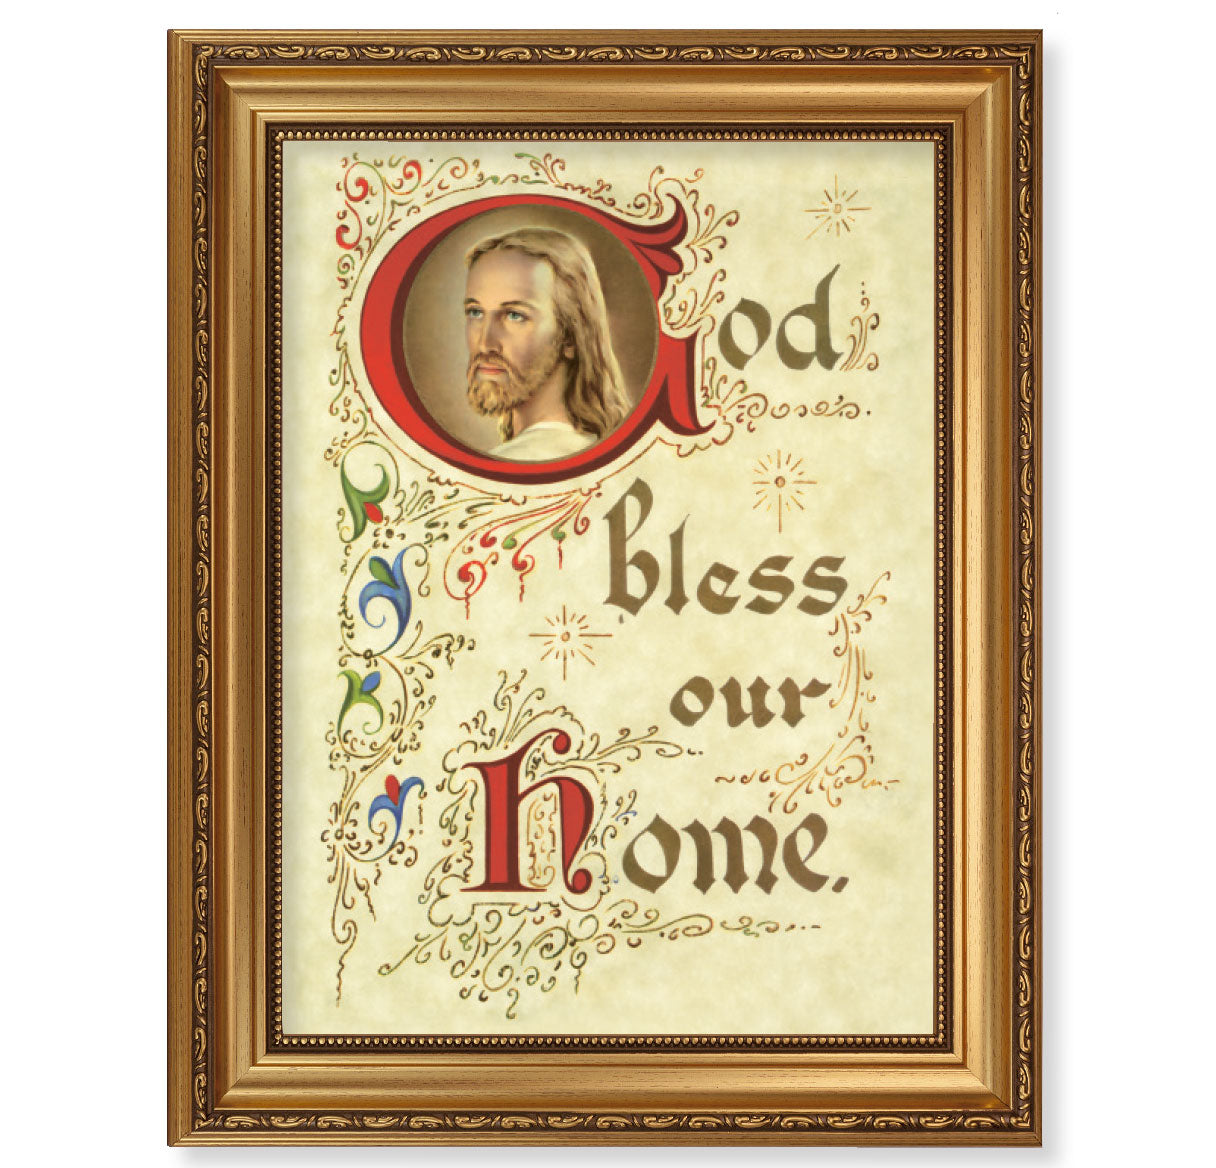 House Blessing Antique Picture Framed Wall Art Decor Extra Large, Antique Gold-Leaf Frame with Acanthus-Leaf Trim and Beaded Lip